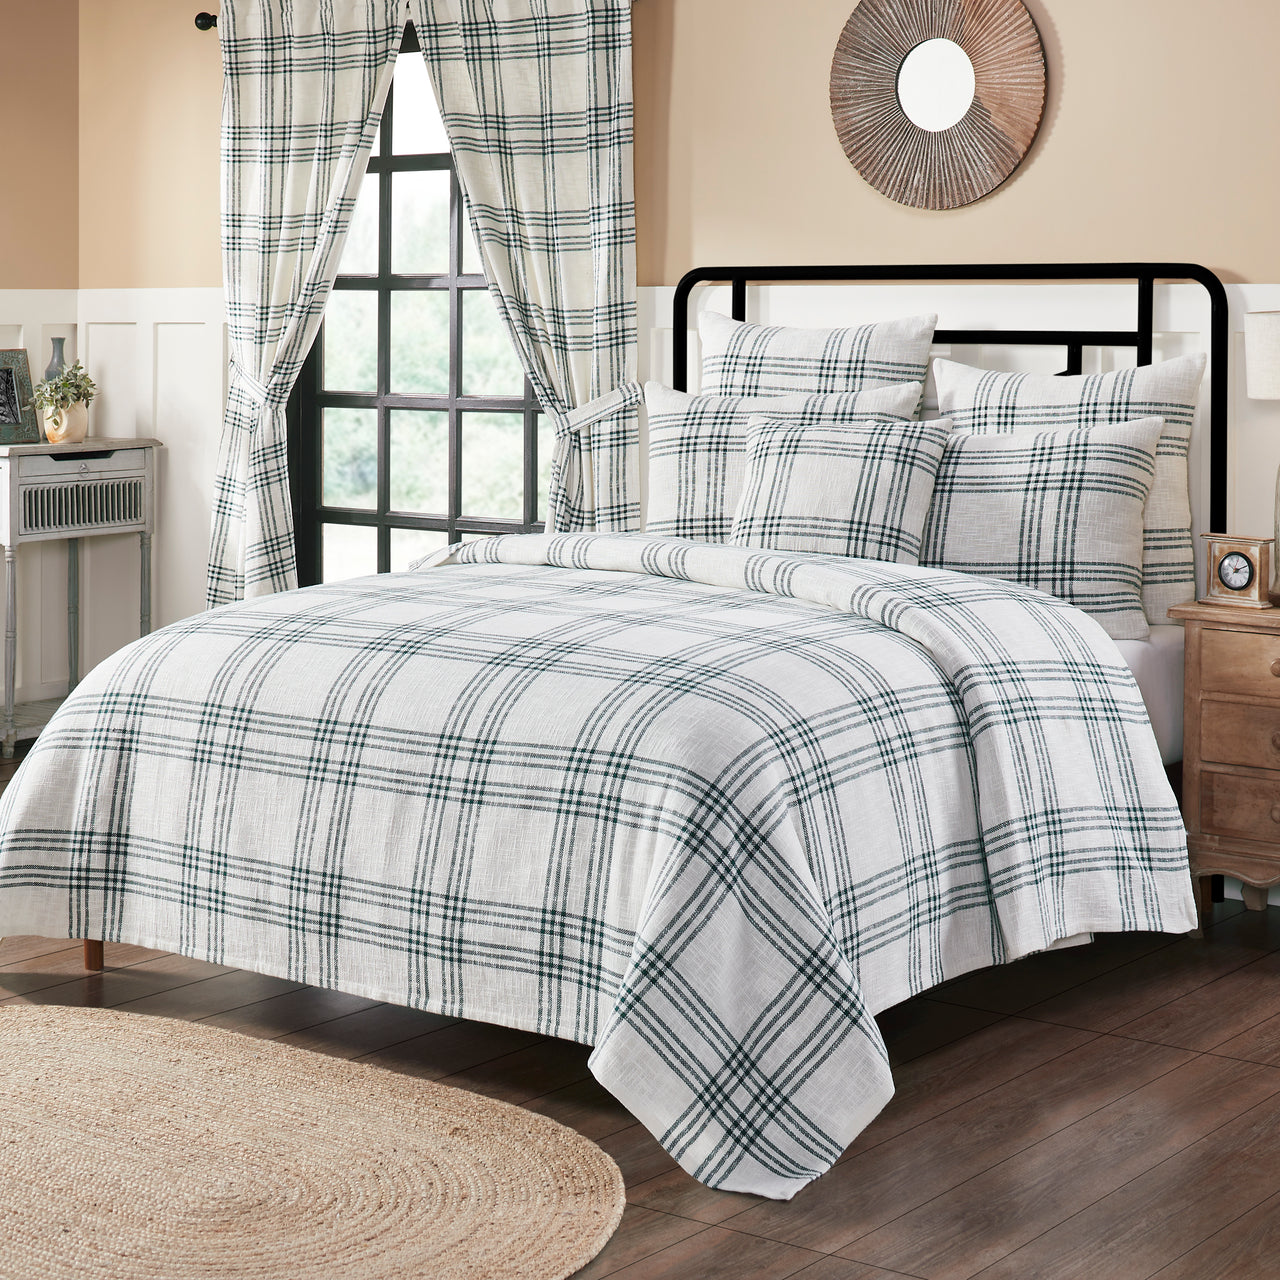 Pine Grove Plaid Queen Coverlet 94x94 VHC Brands